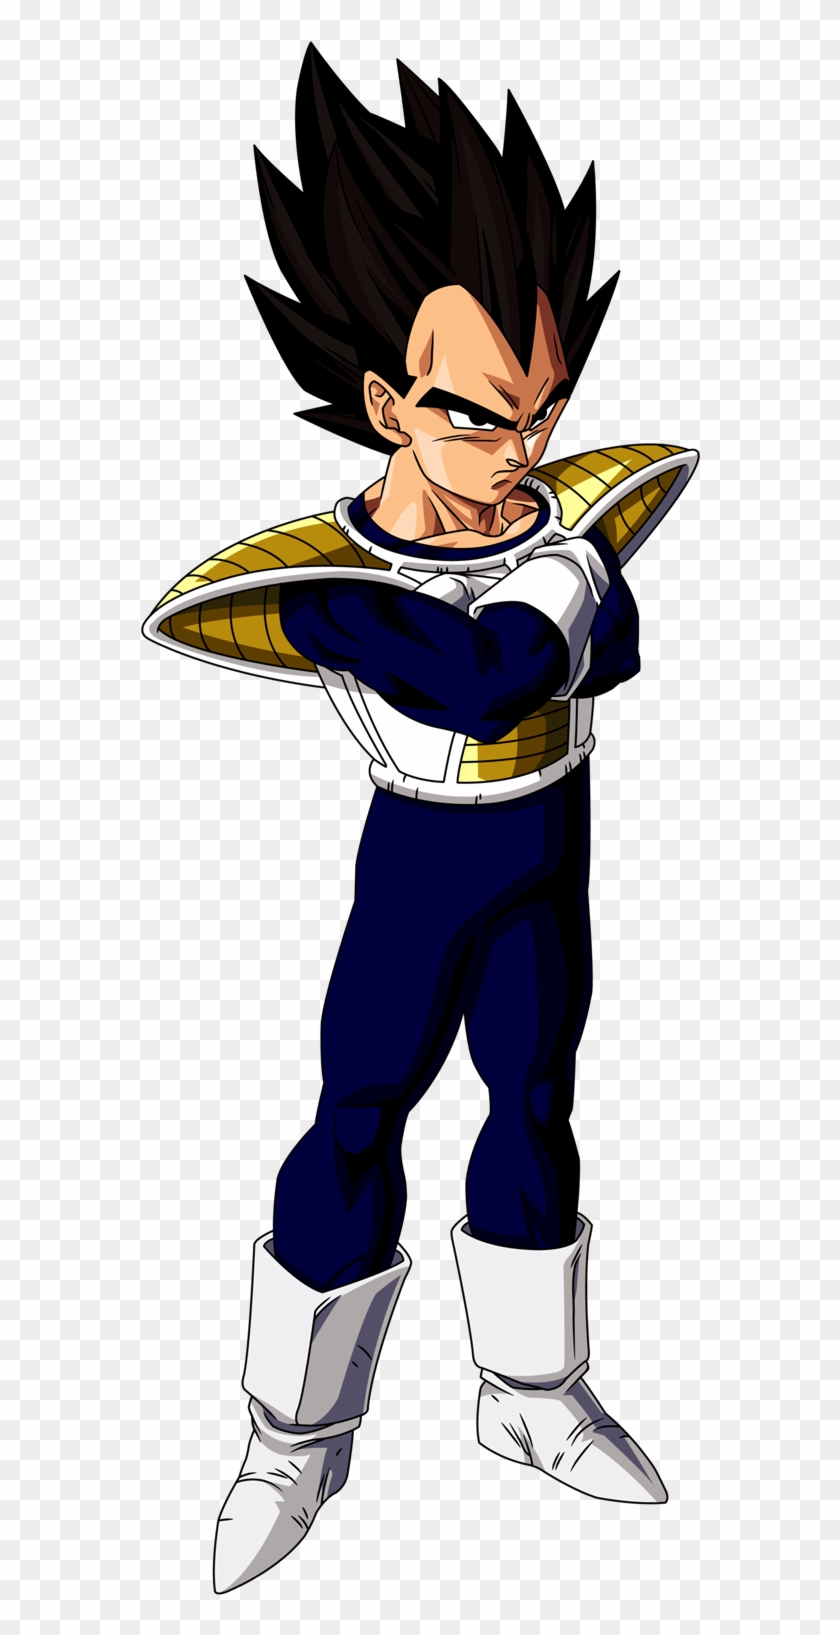 Dragon Ball Z Characters No Background Clipart #3383710